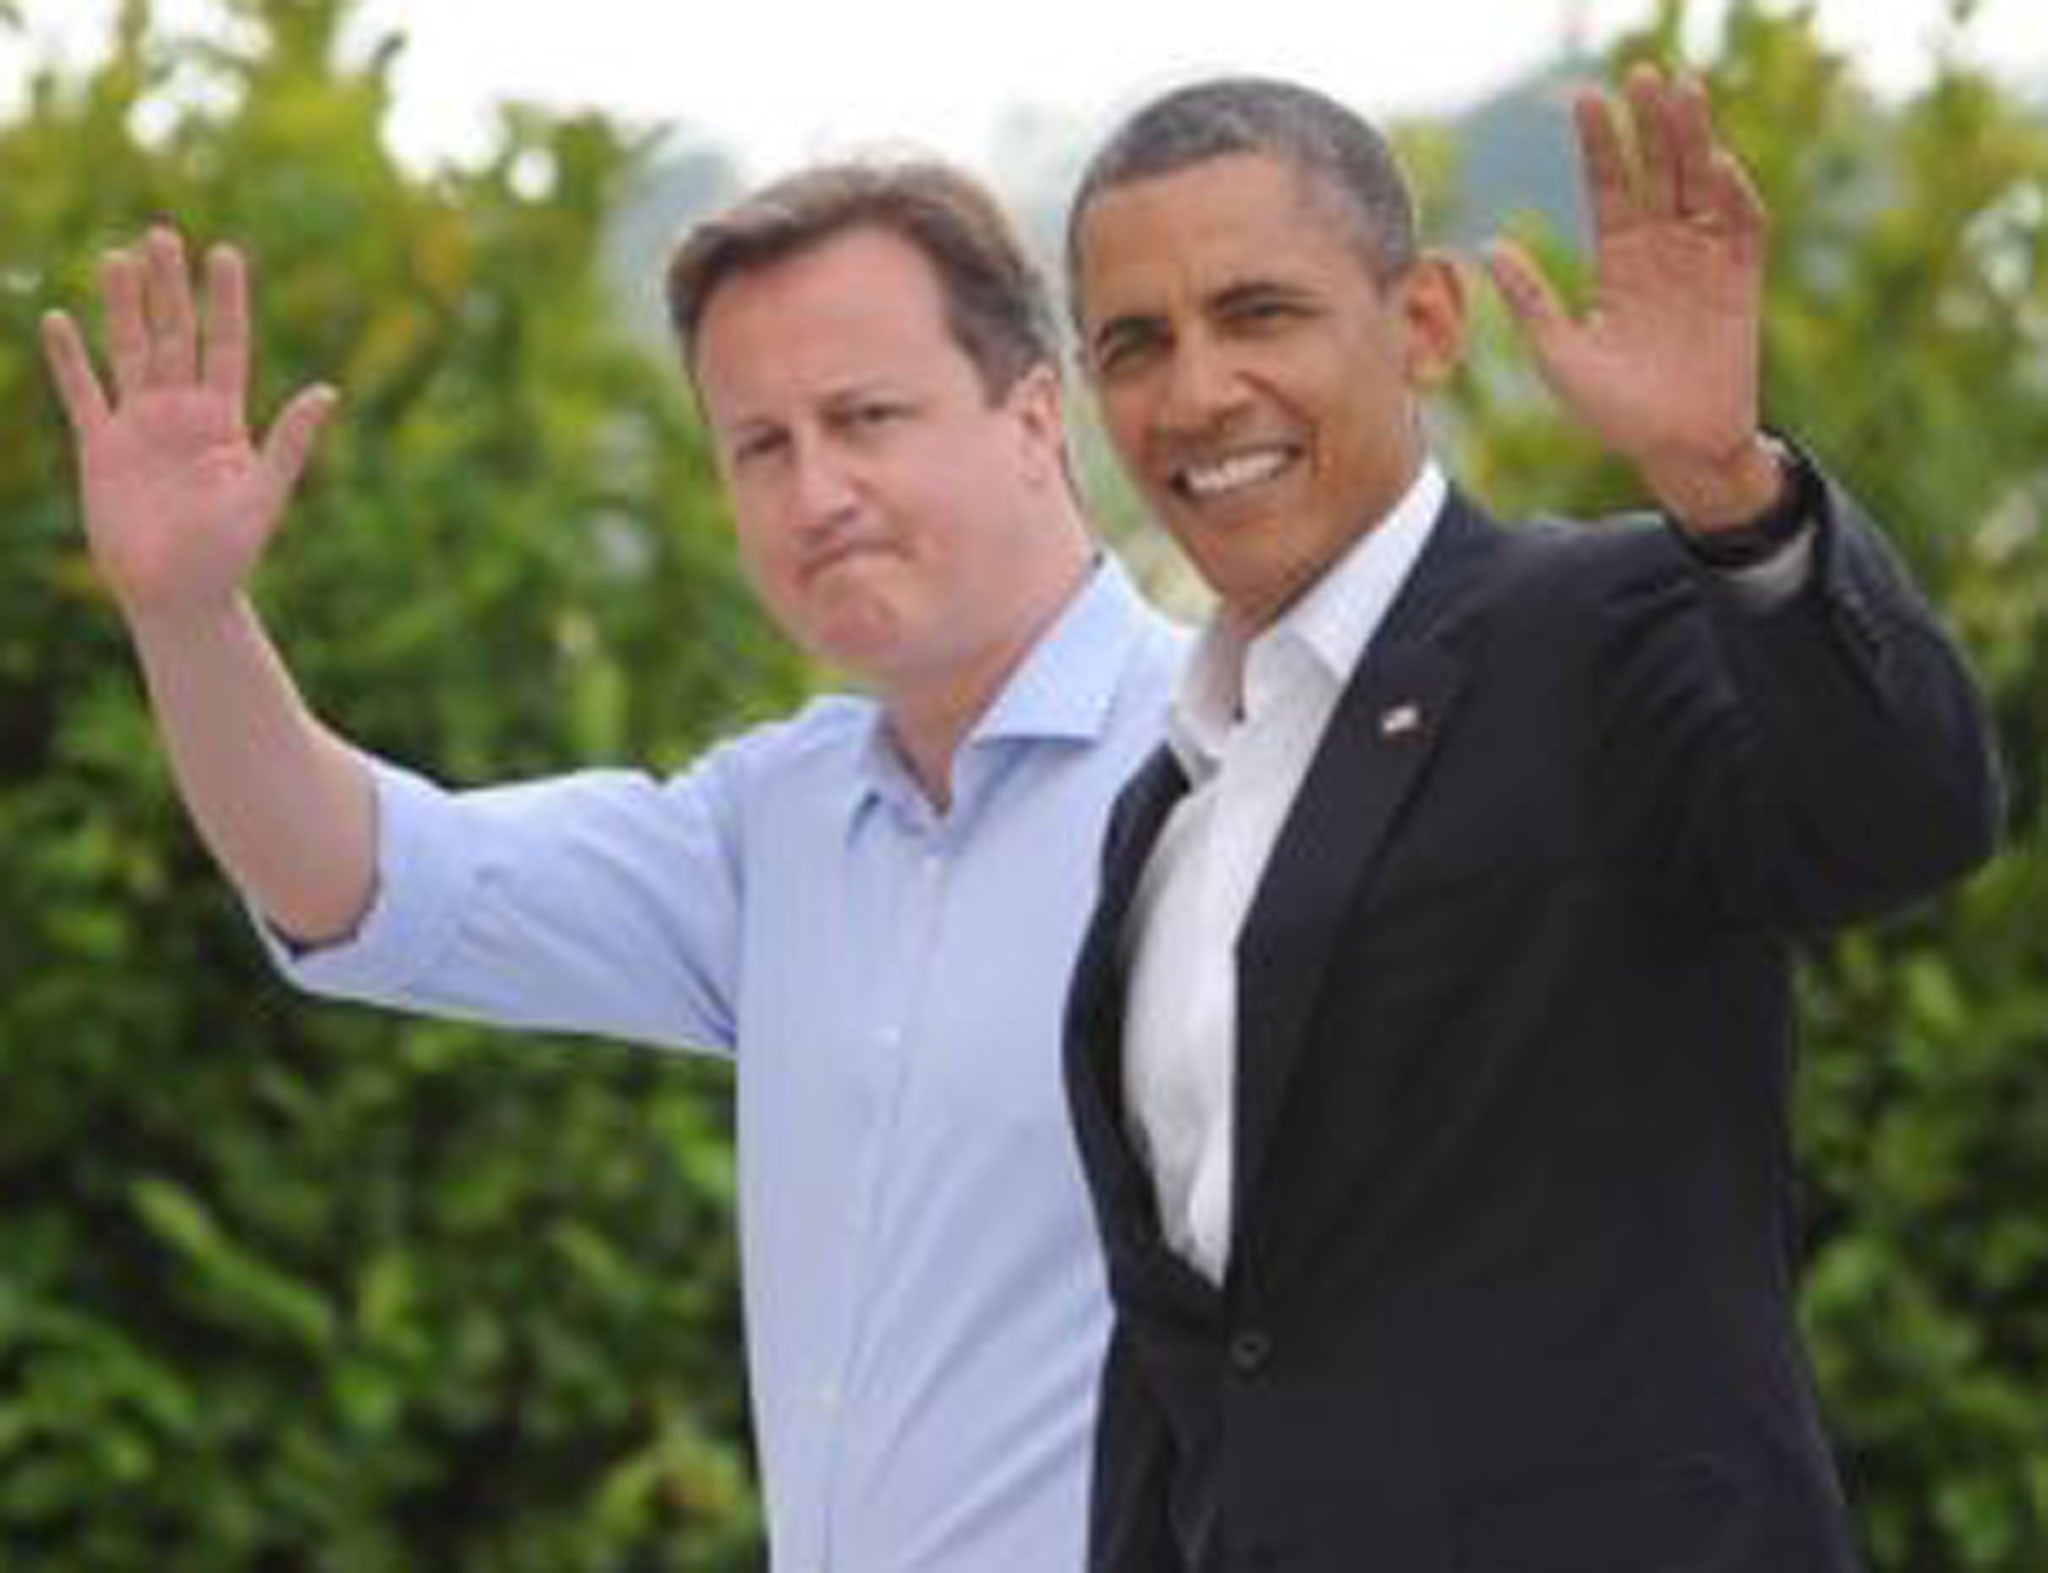 David Cameron (left) welcomes Barack Obama (right) to the G8 summit in Northern Ireland